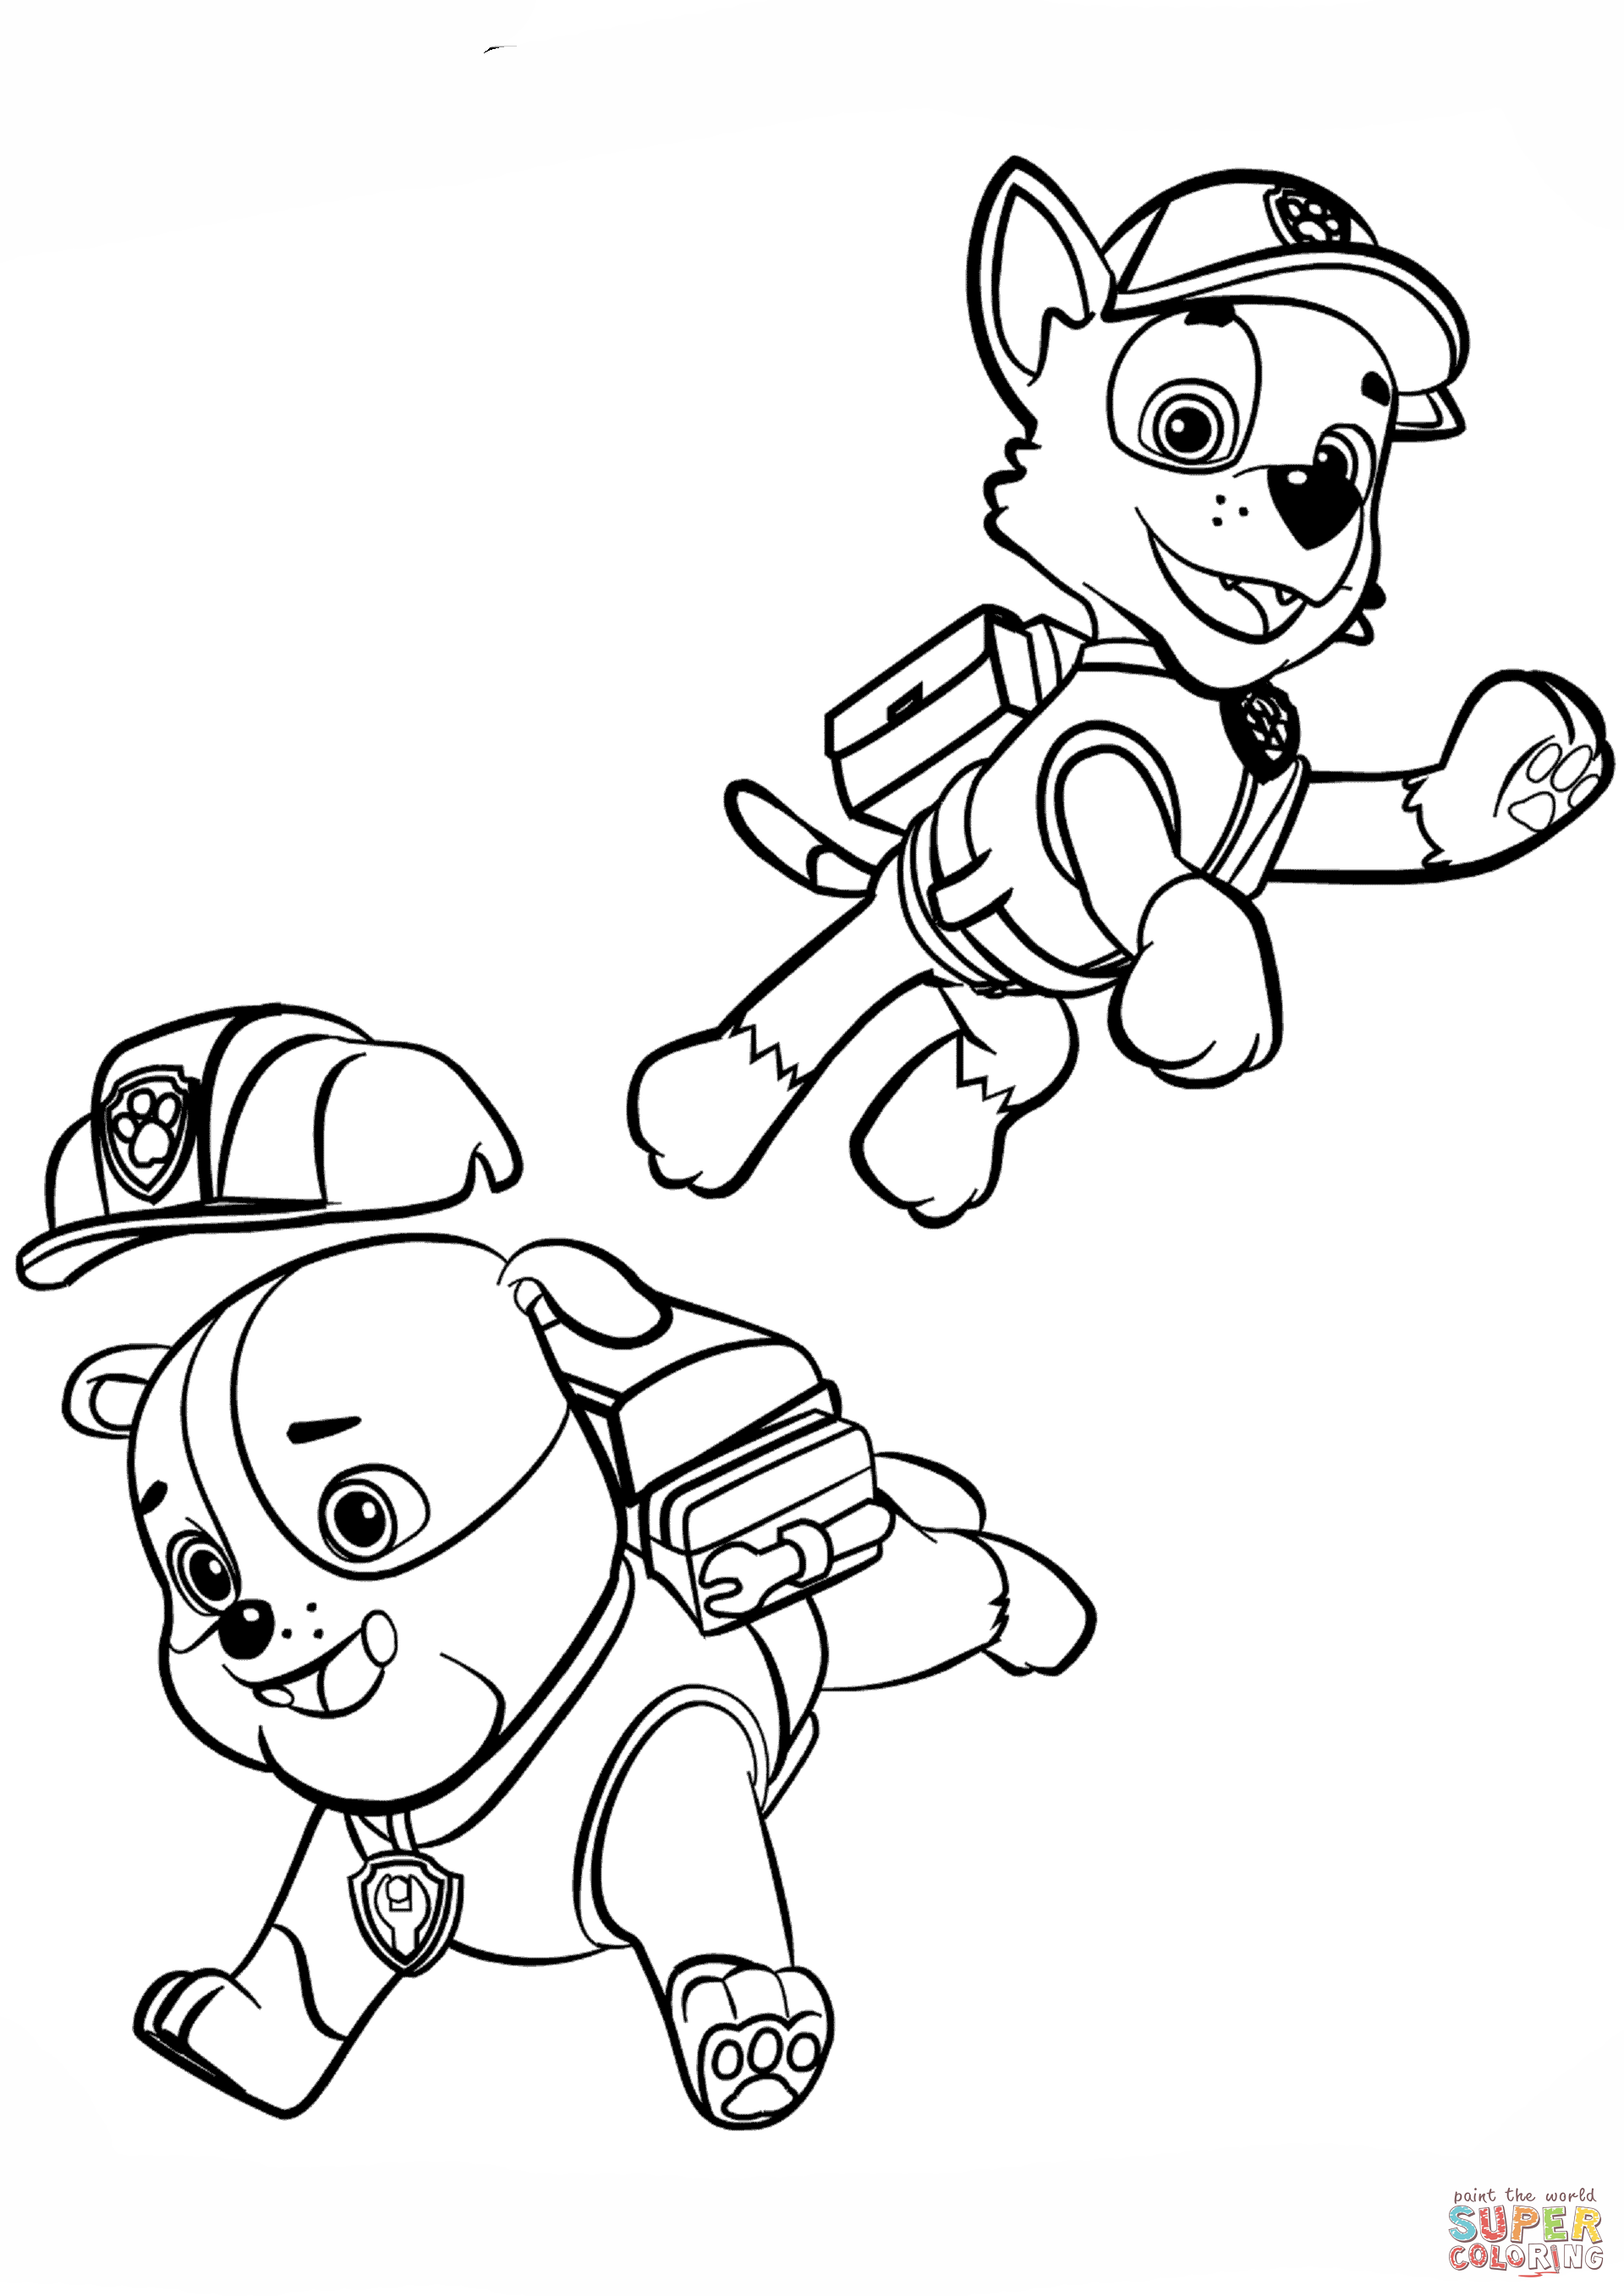 Paw patrol rubble and rocky coloring page free printable coloring pages